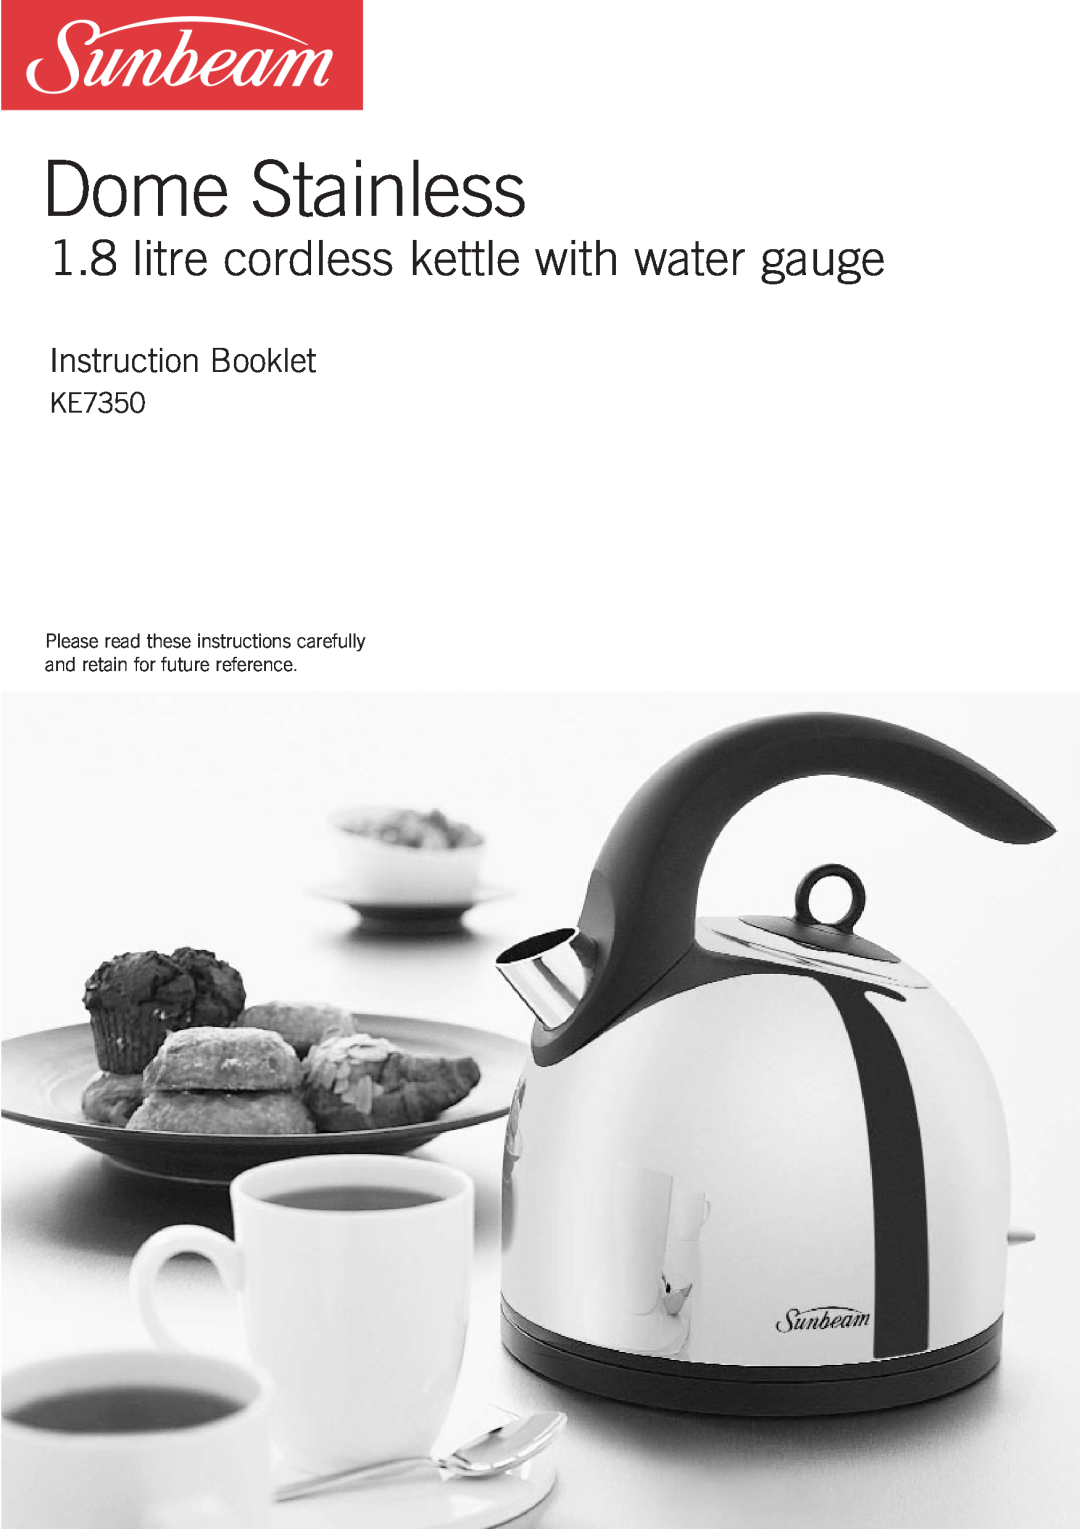 Sunbeam KE7350 manual Dome Stainless, litre cordless kettle with water gauge, Instruction Booklet 